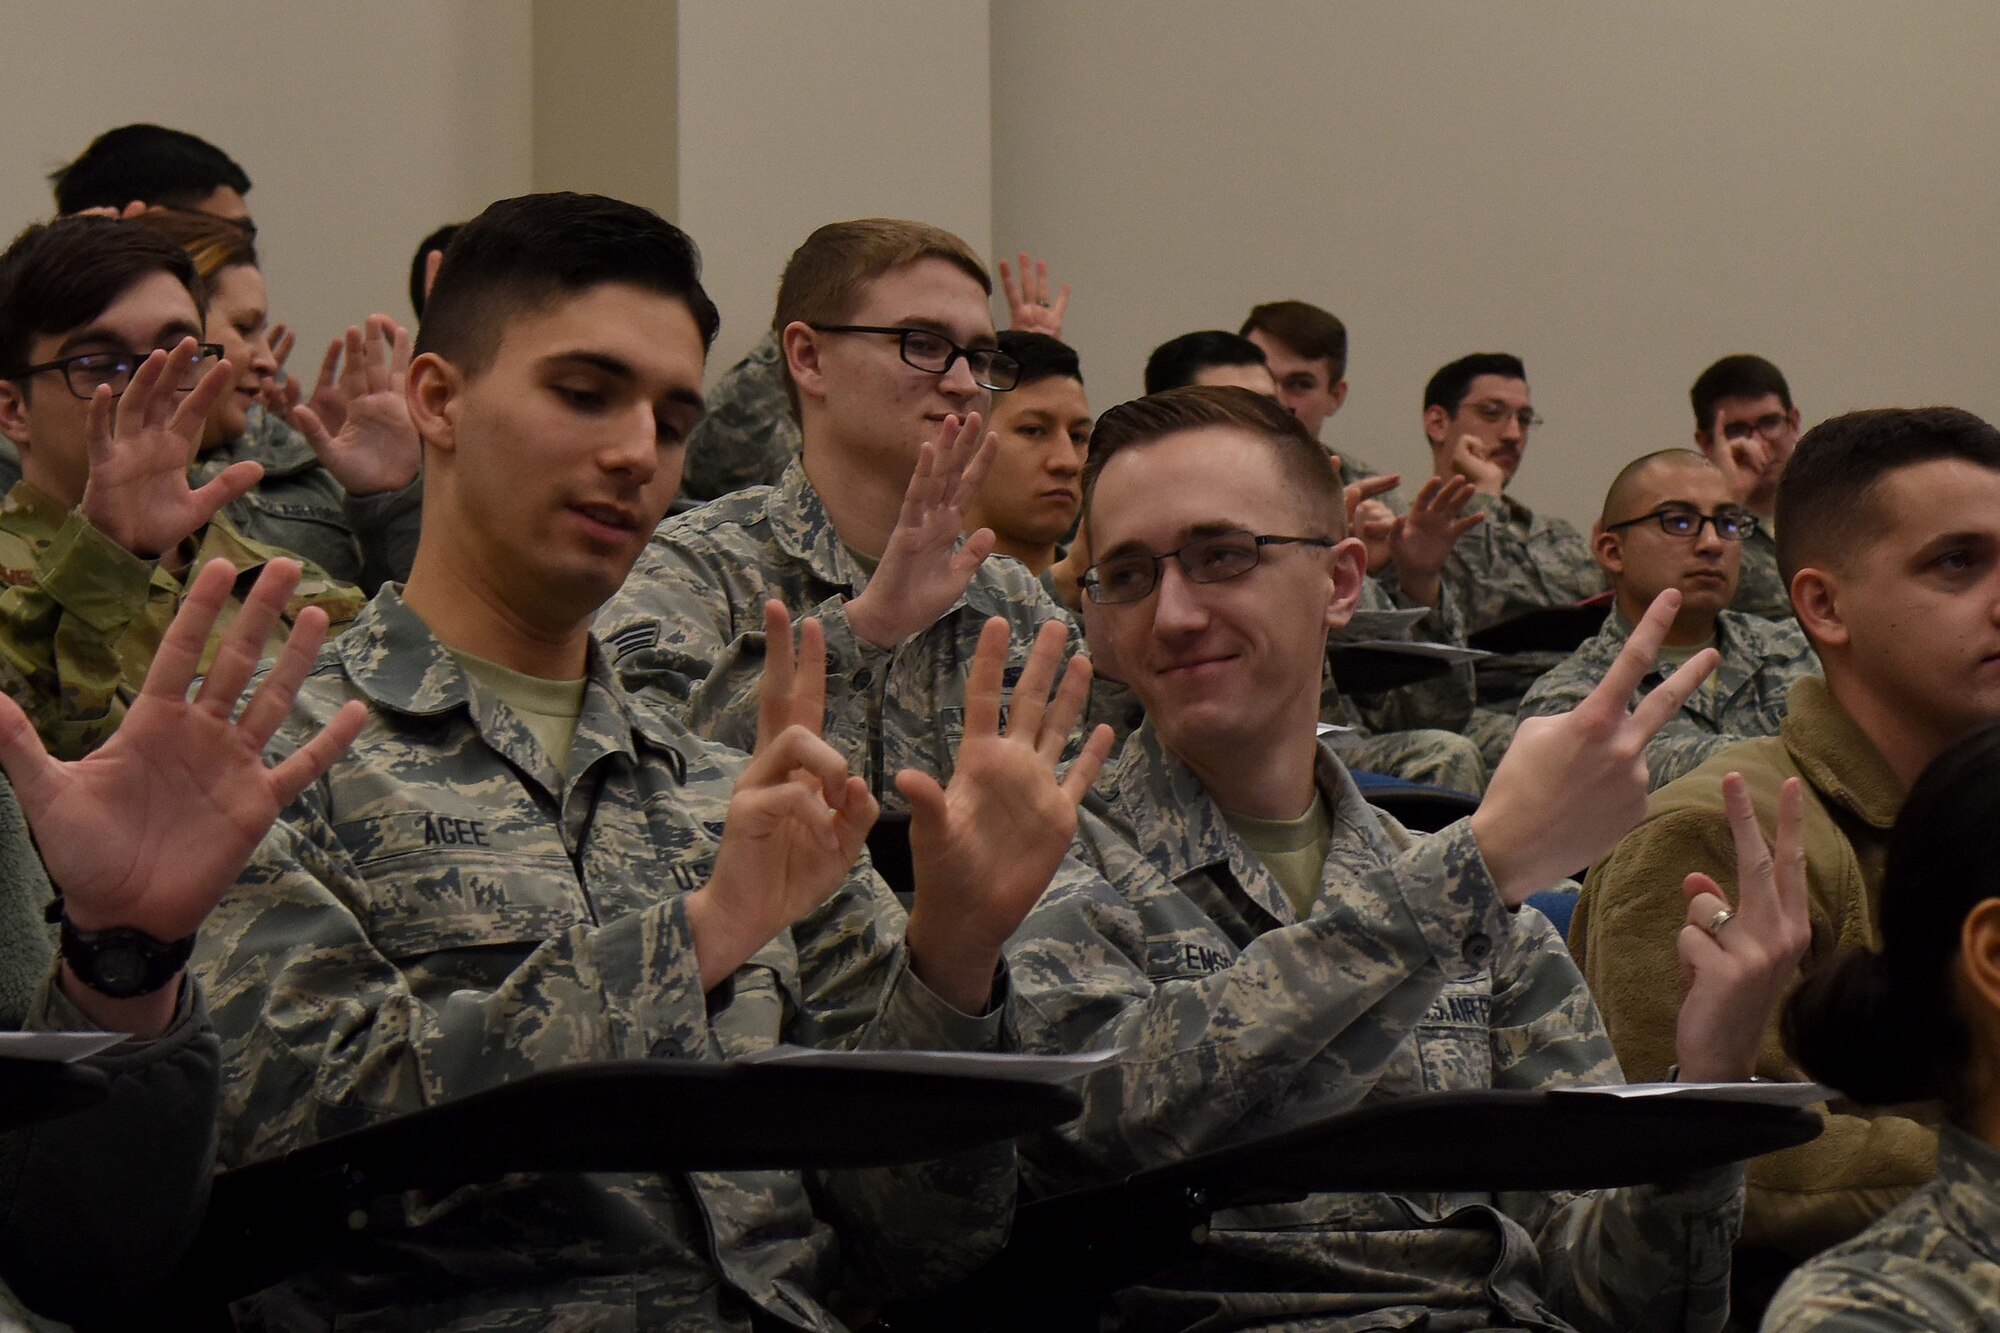 548th ISRG Looks ‘Outside the Box’ to Develop Air Force Leaders